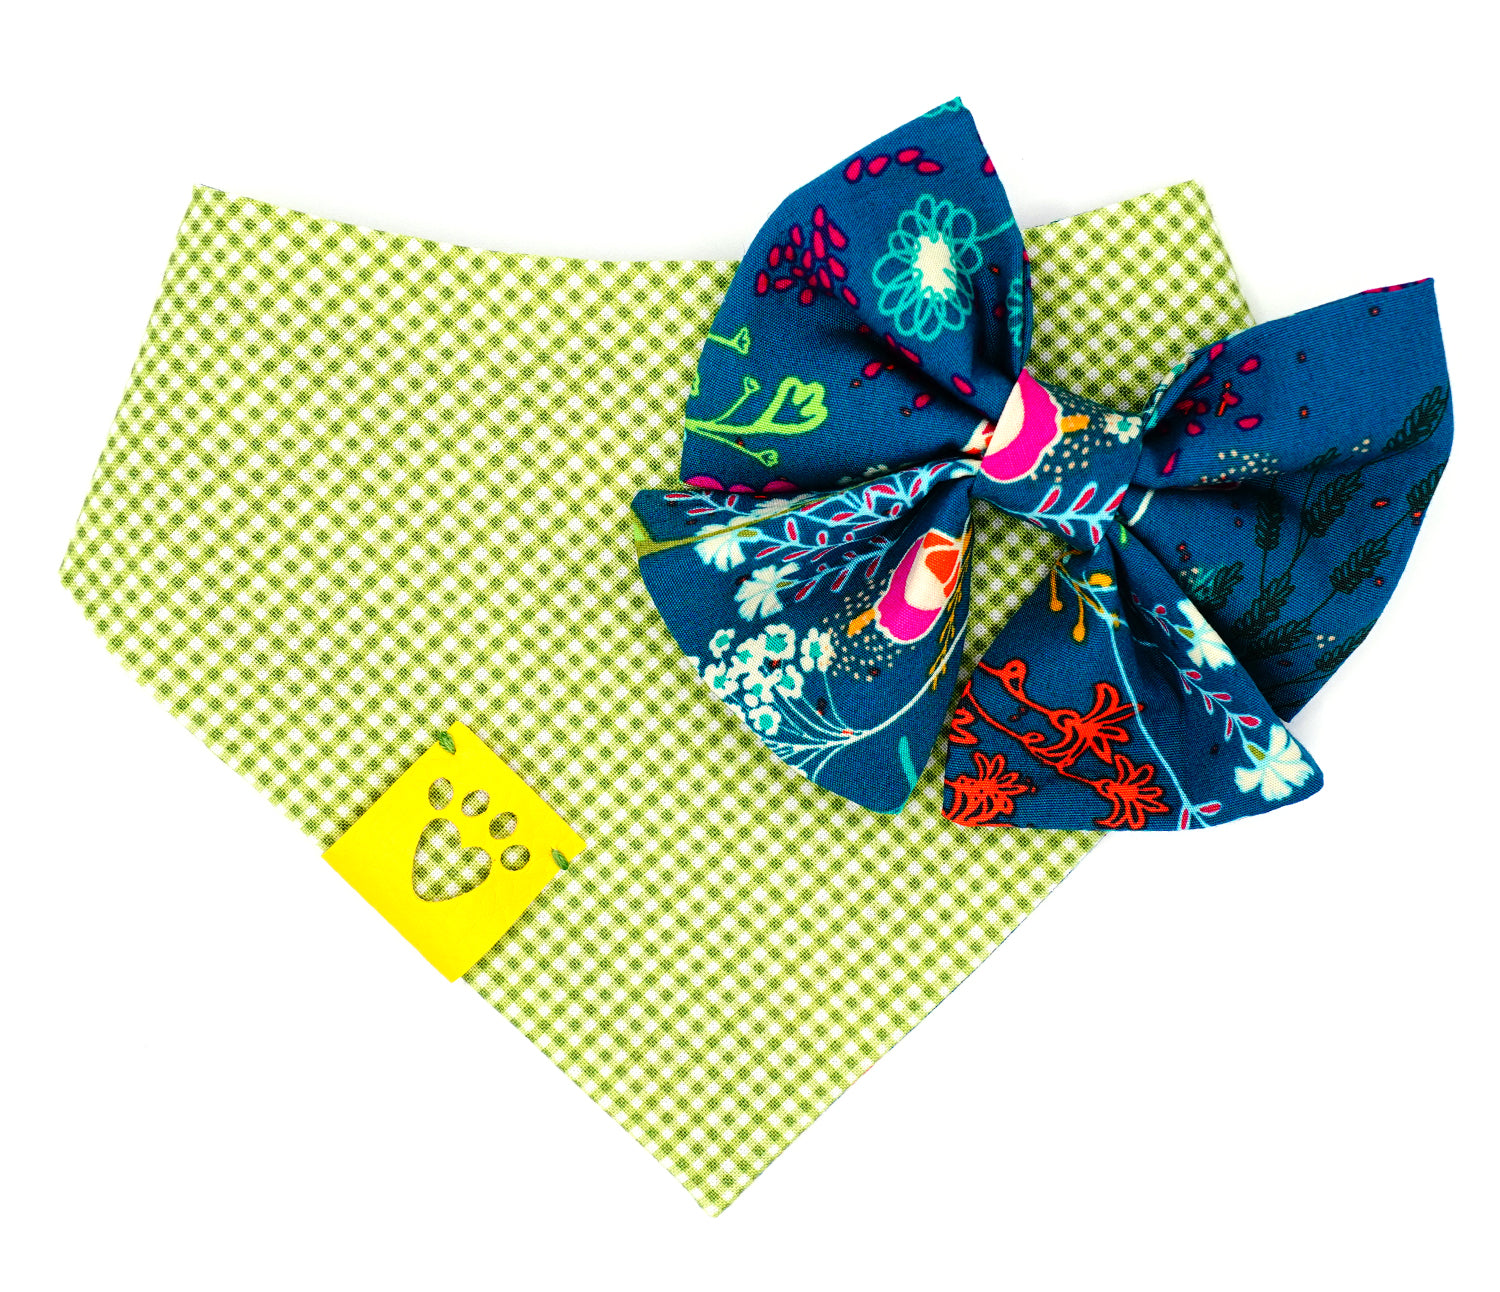 Handmade cotton bow tie with tails for dogs (or other pets). Elastic straps on back with snaps make it easy to add to collar, harness, or leash. Dark green/teal background with magenta, dark purple, lime green, white, light blue, goldenrod, and orange flowers.